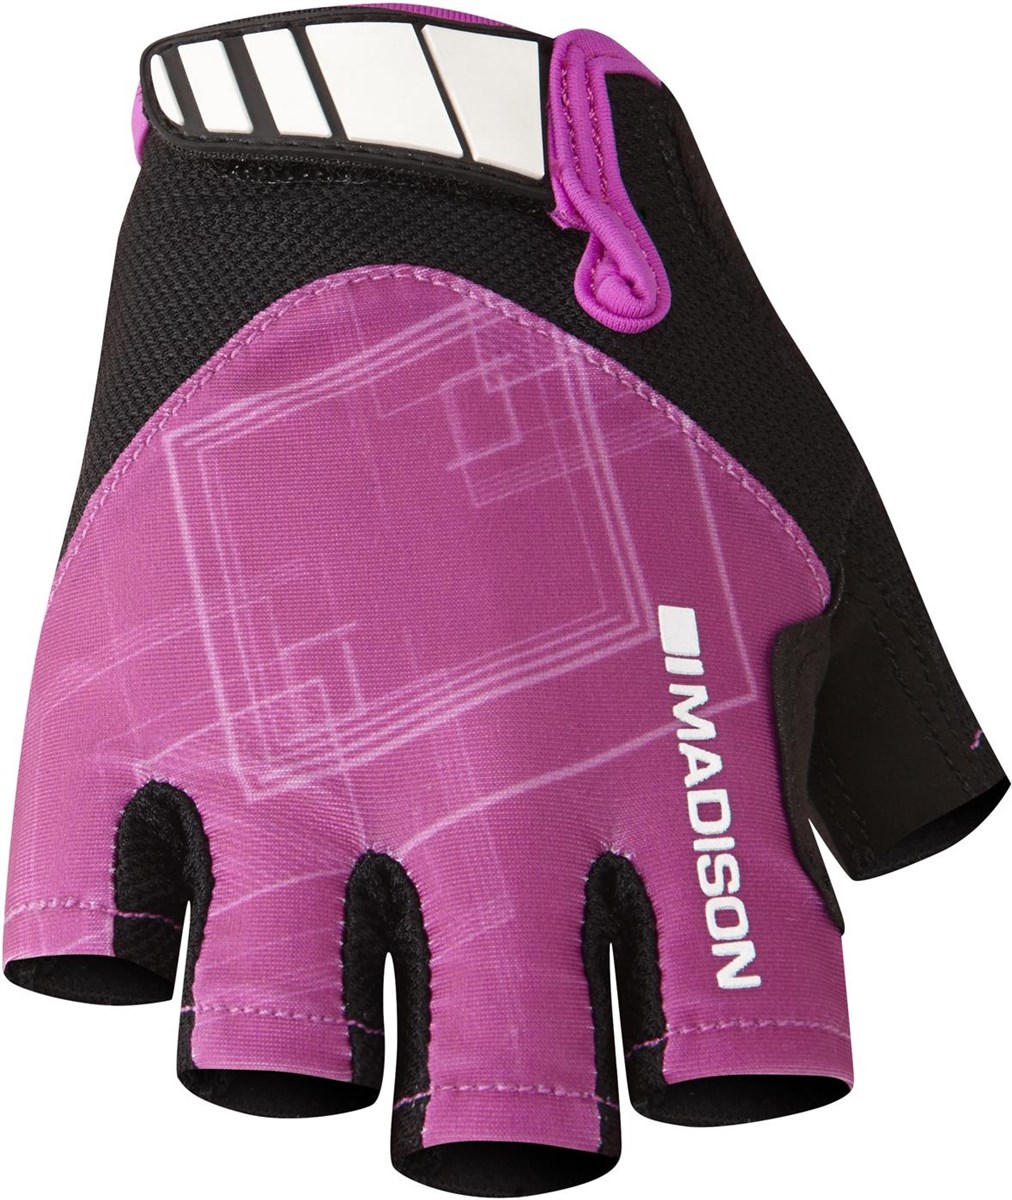 Madison Sportive Womens Mitts Short Finger Gloves product image